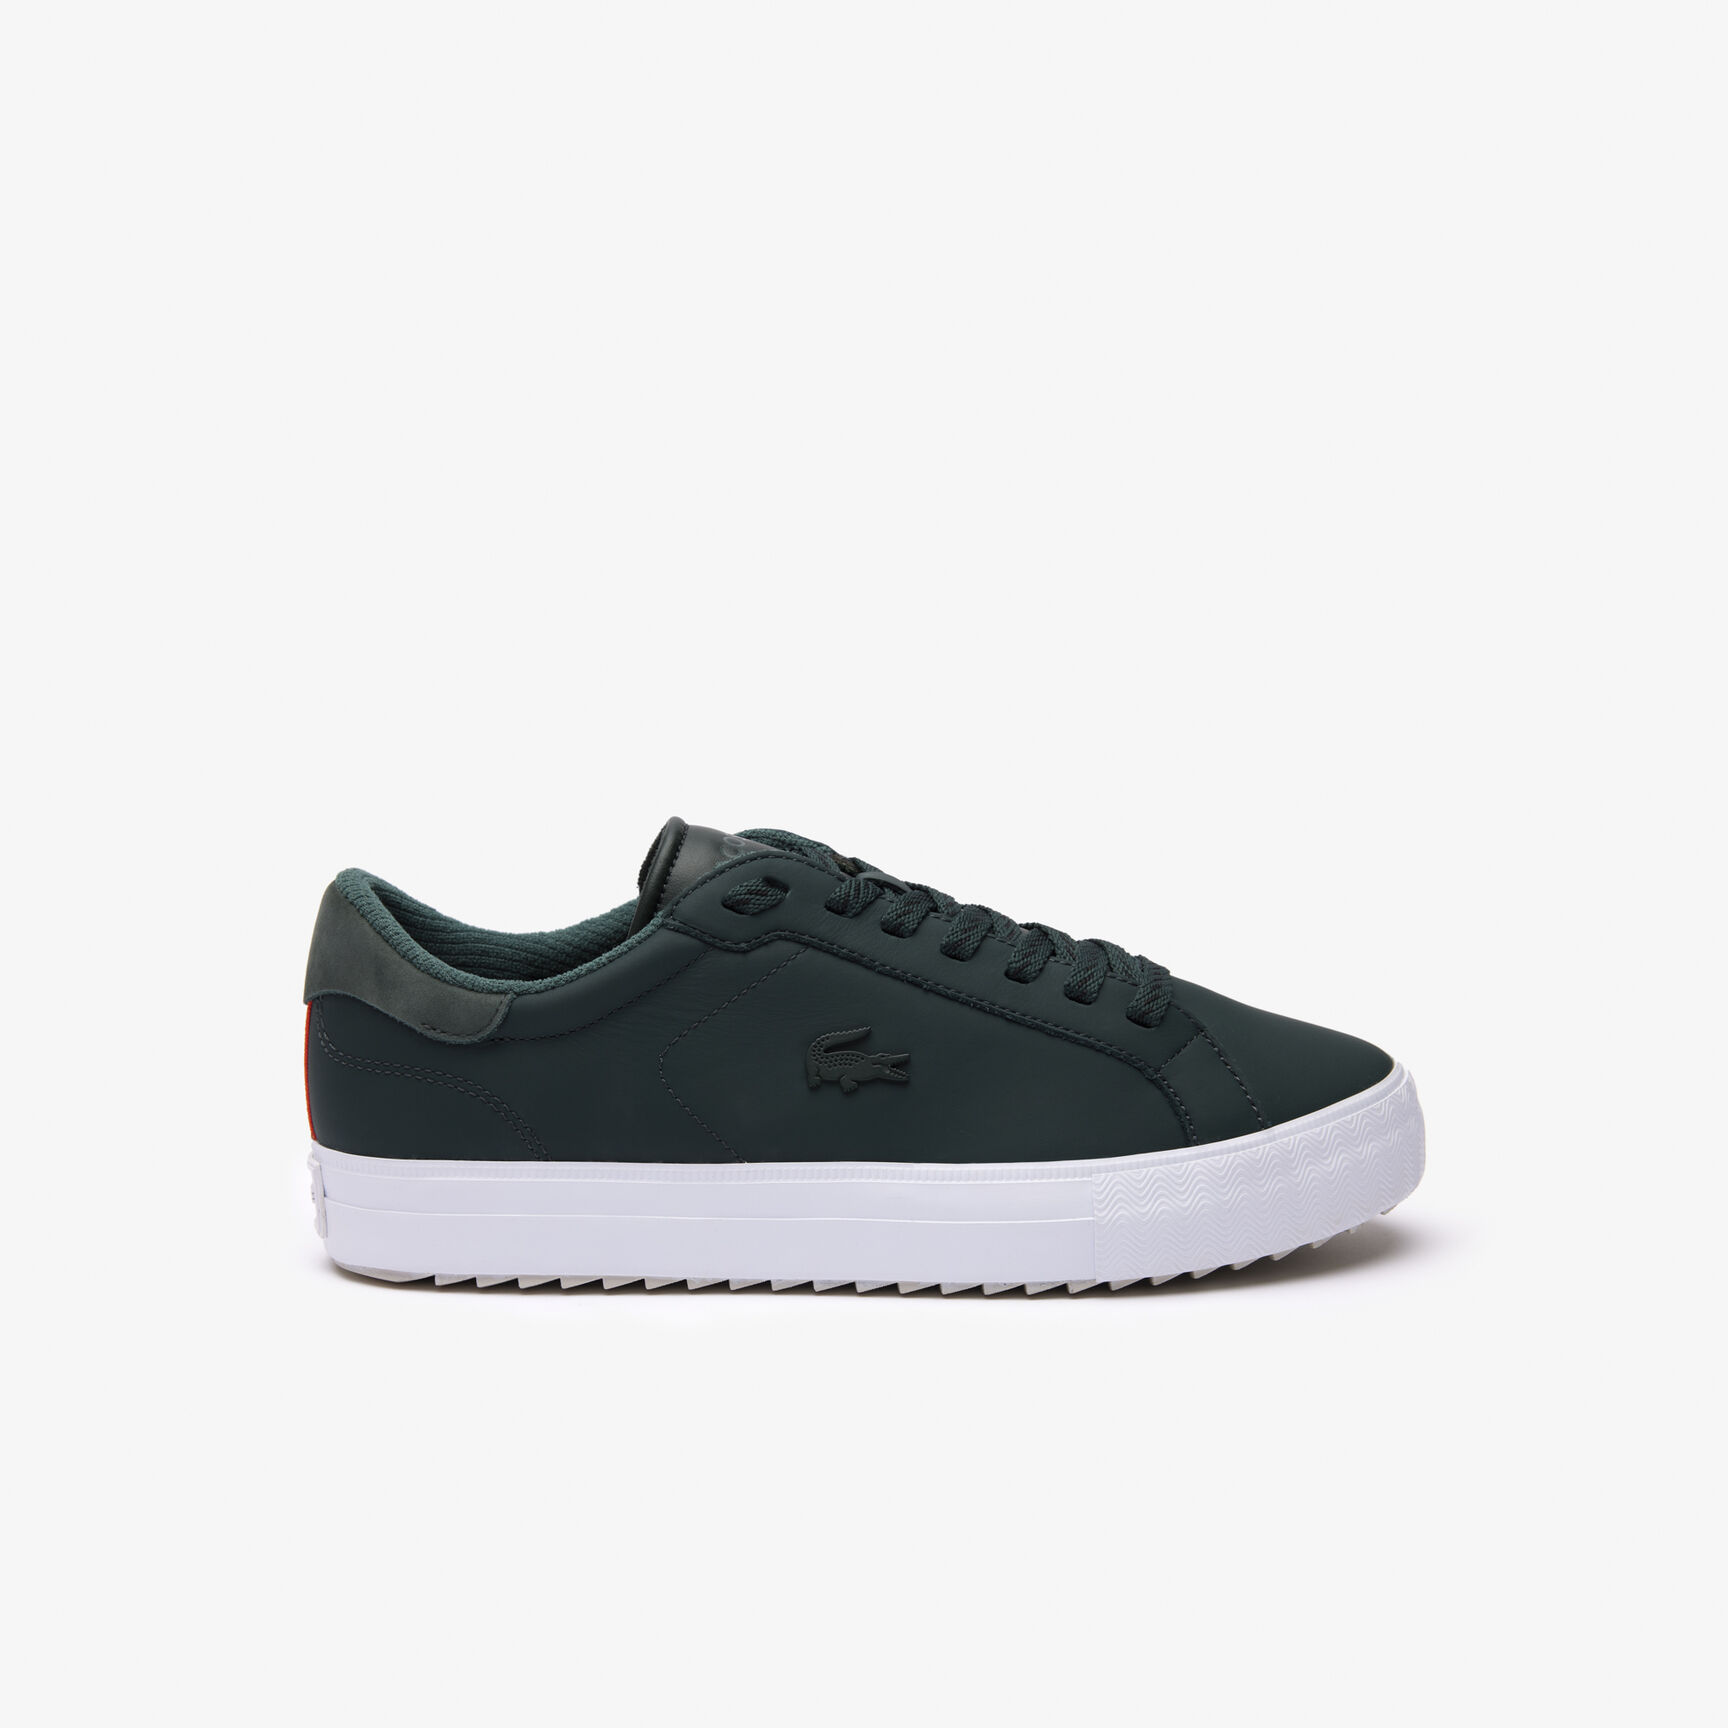 Buy Men's Powercourt Winter Leather Outdoor Trainers | Lacoste UAE